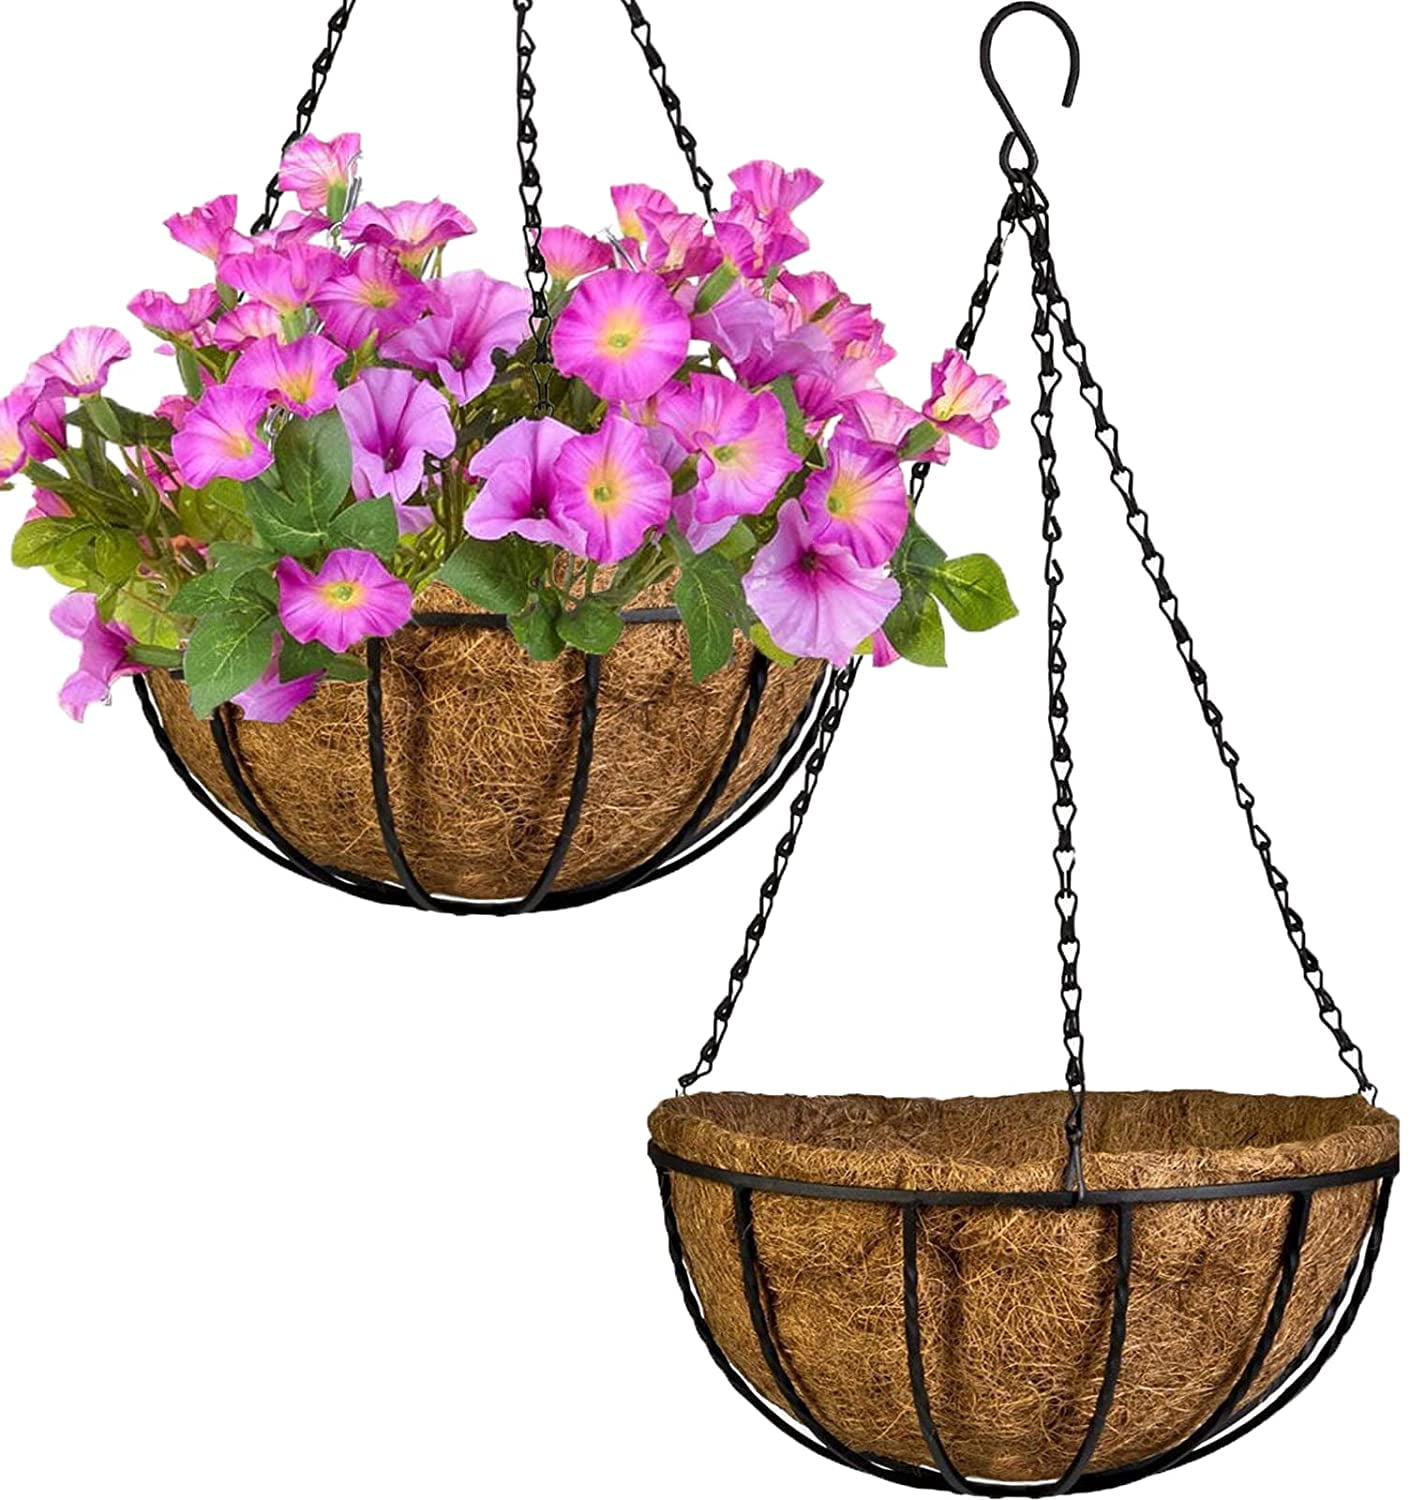 Wizdar 2PCS Round Coco Liners for Planters 8IN Replacement Hanging Baskets Coir Liners Thick Coconut Fiber Liner for Hanging Basket Indoor Outdoor Garden Flower Vegetables Pot 